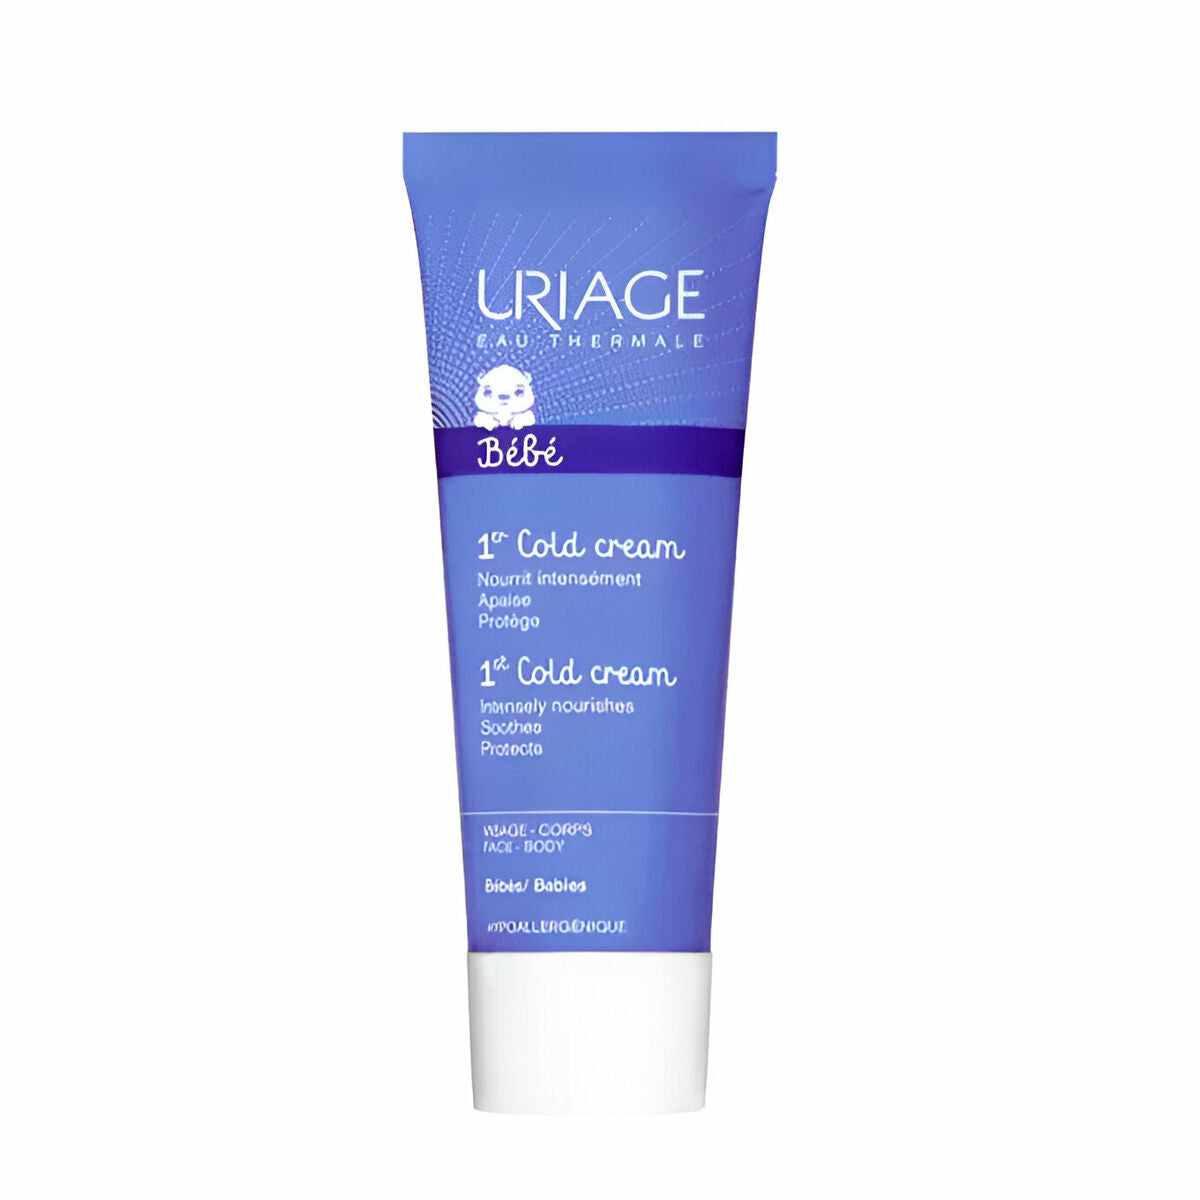 Repair Cream for Babies Uriage Eau Thermale Bebe Cold Cream 75 ml